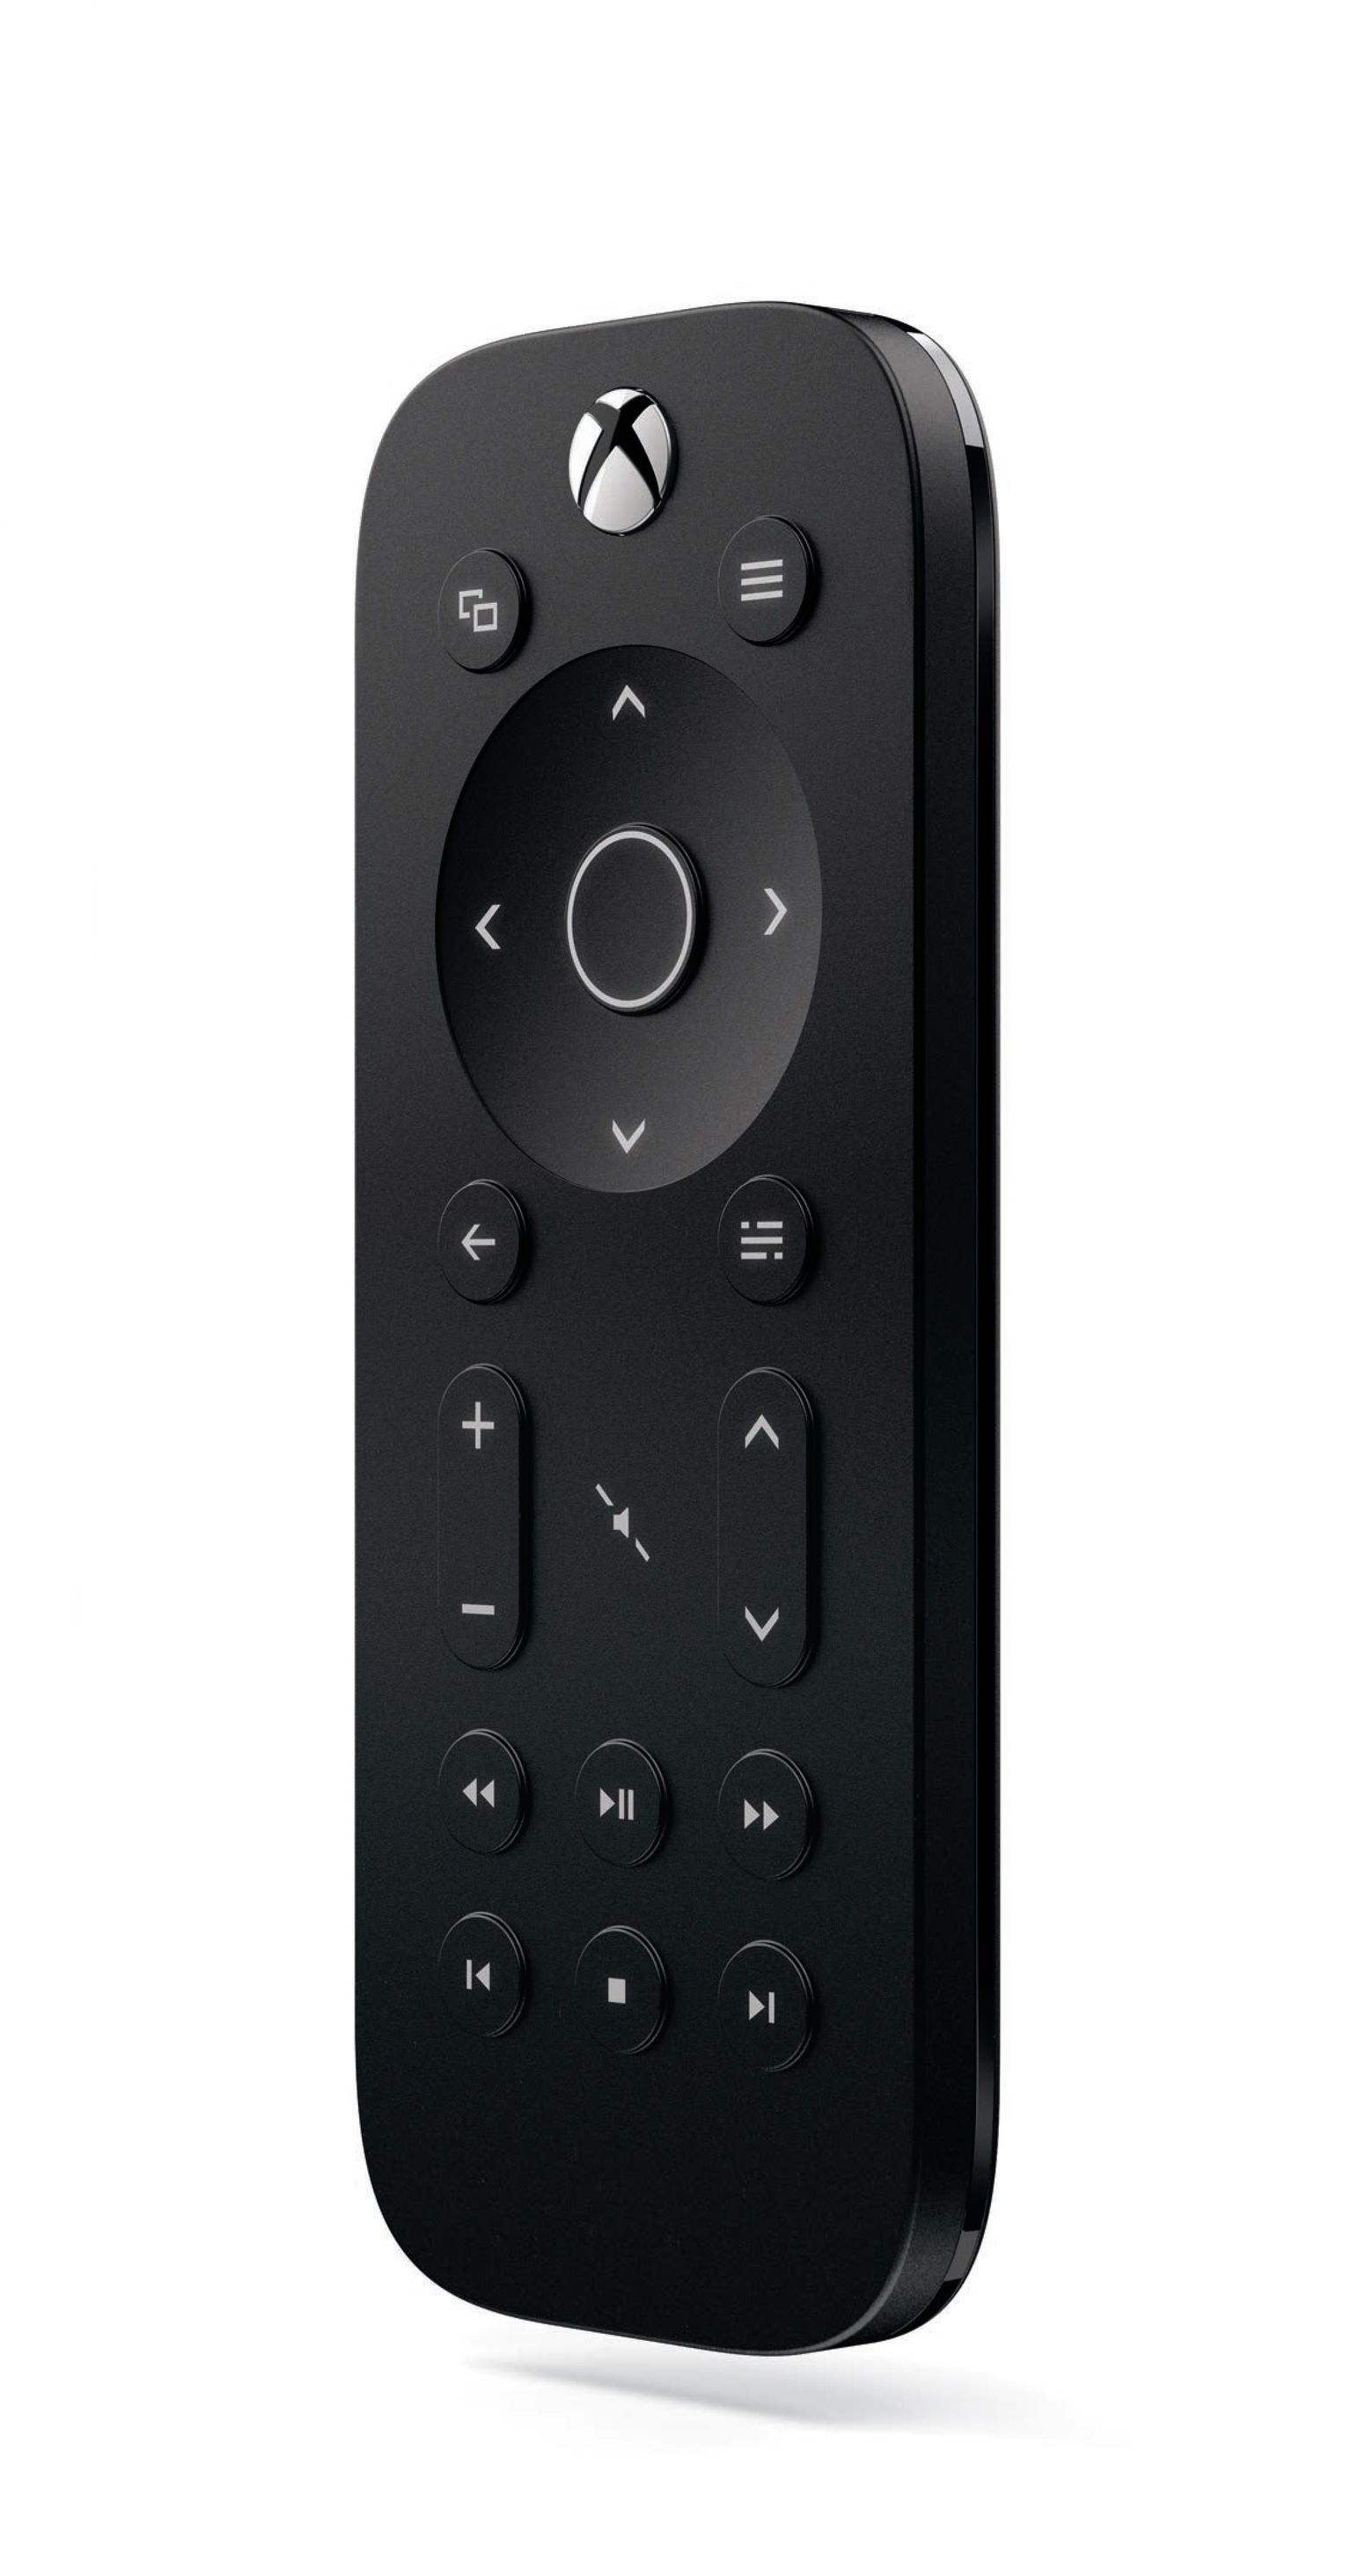 Xbox One Media Remote - Entry - iF WORLD DESIGN GUIDE